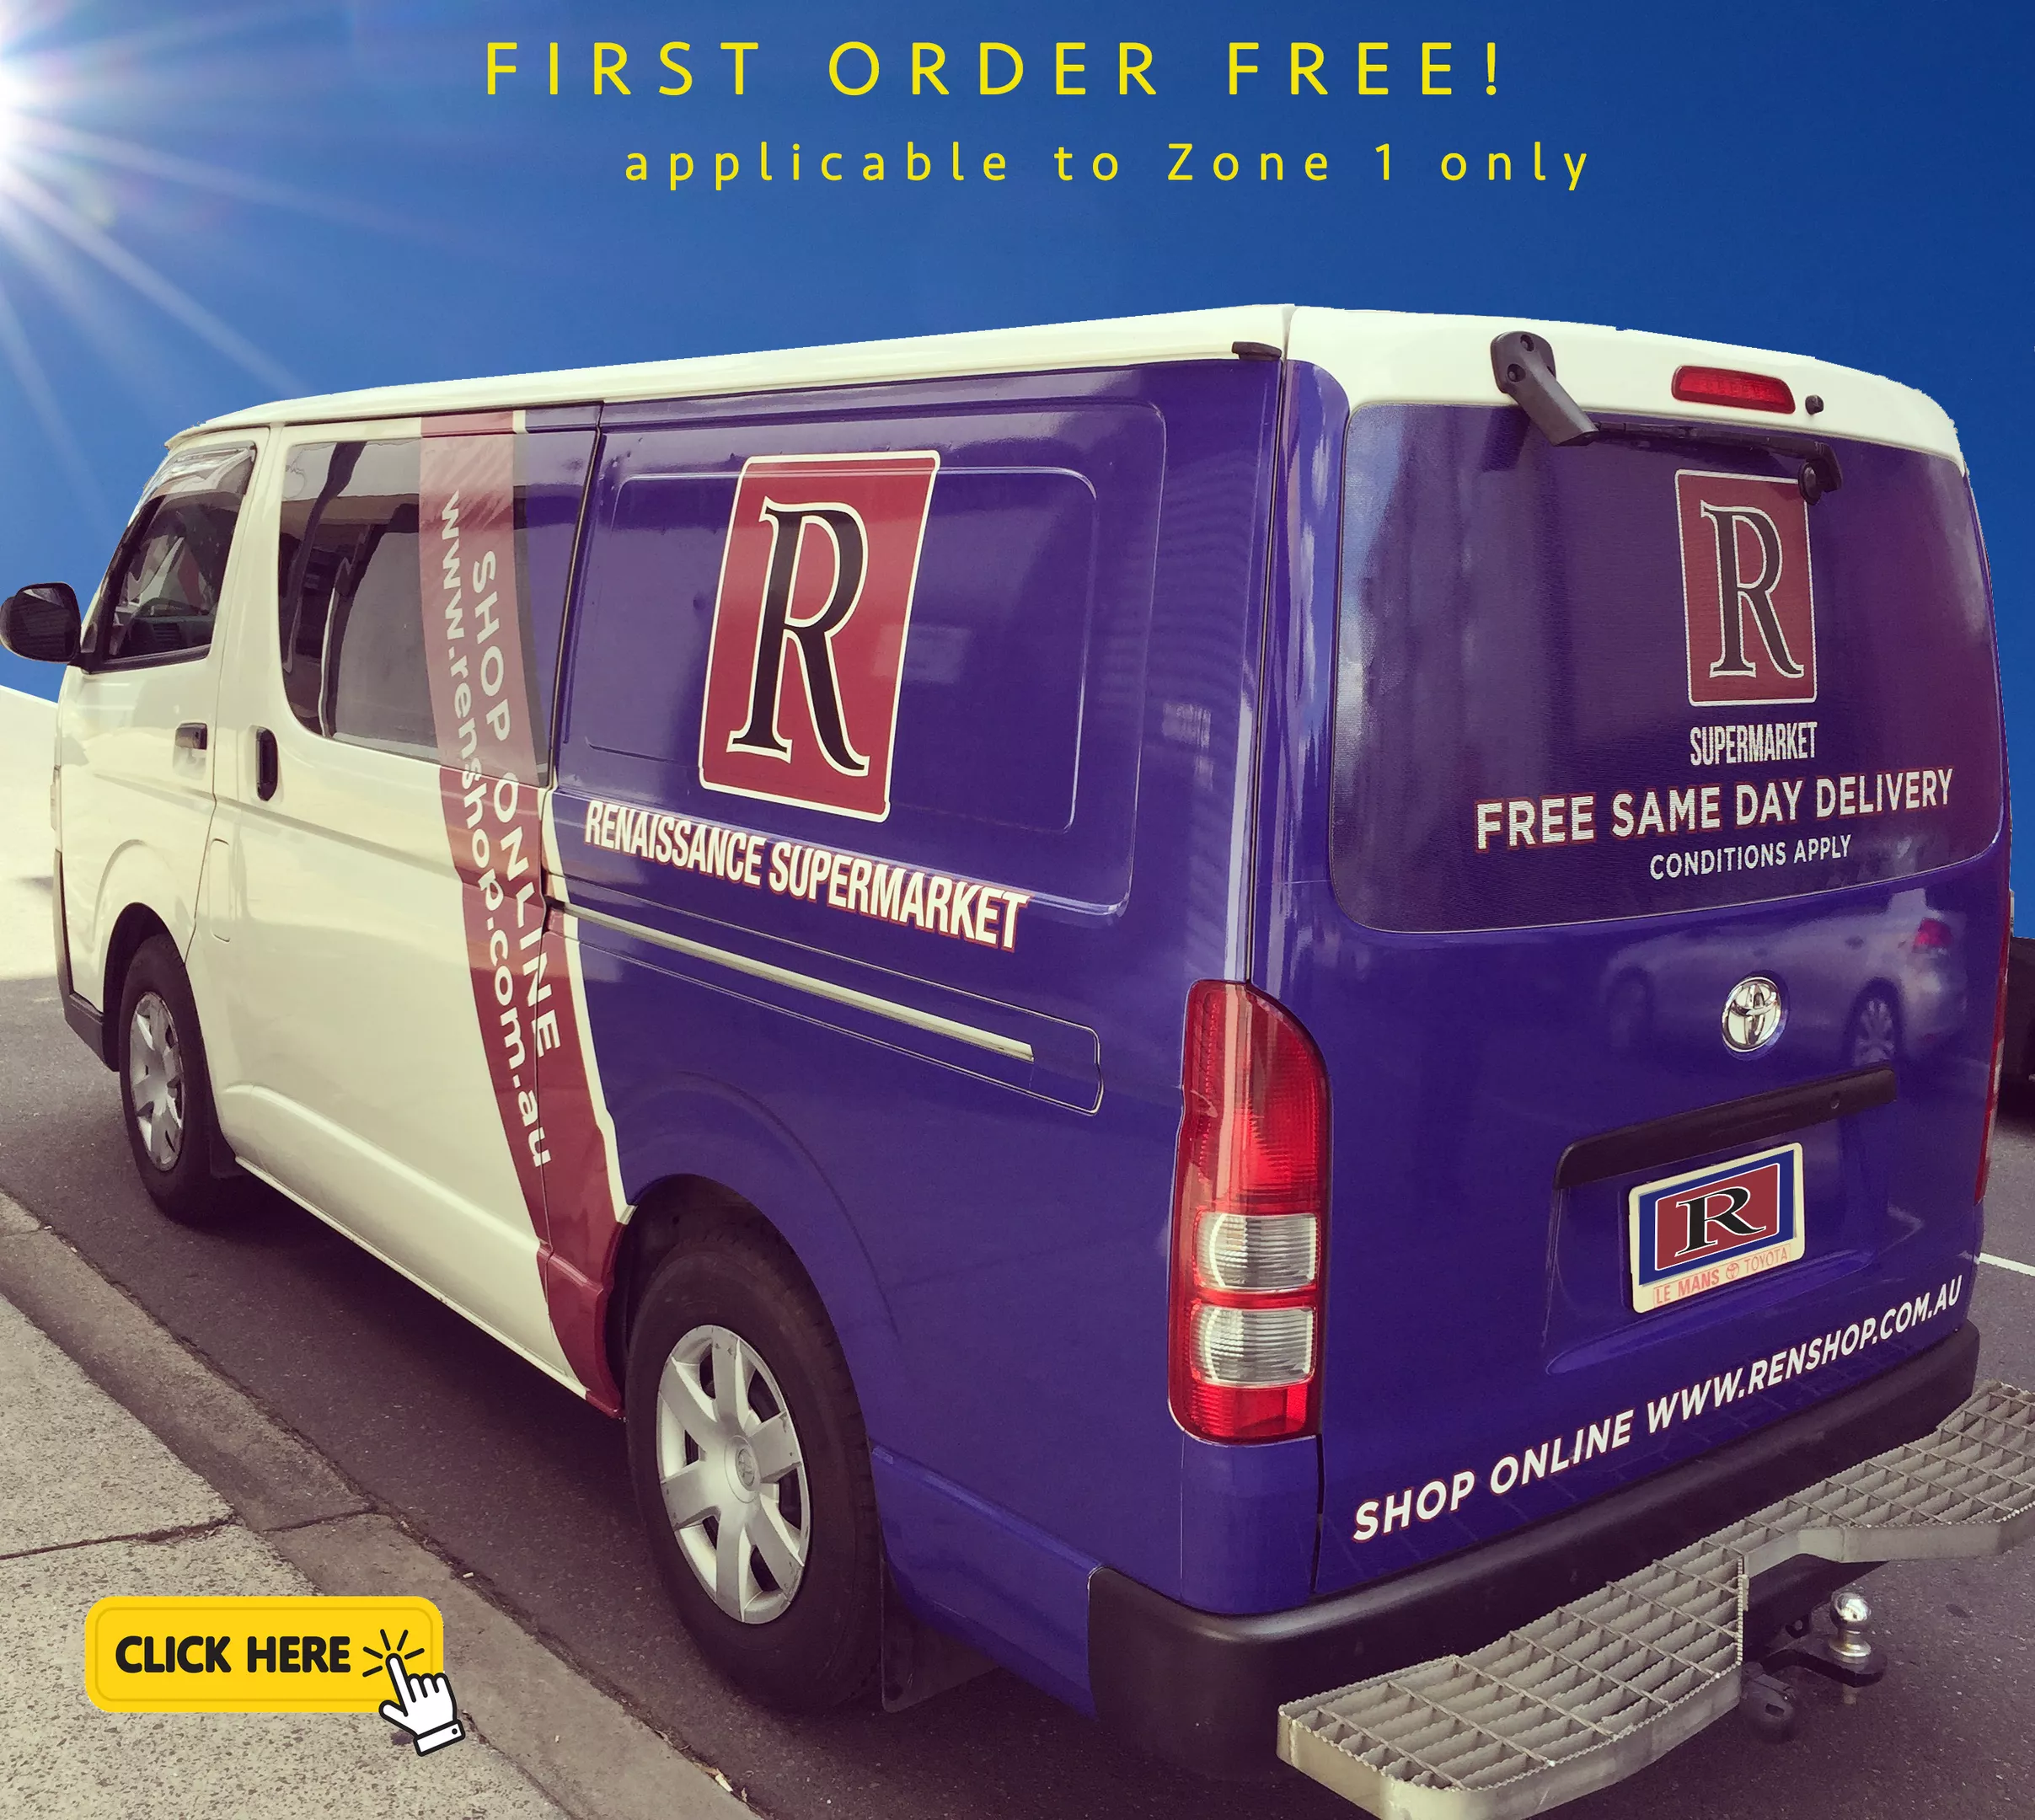 On your first order receive free delivery!